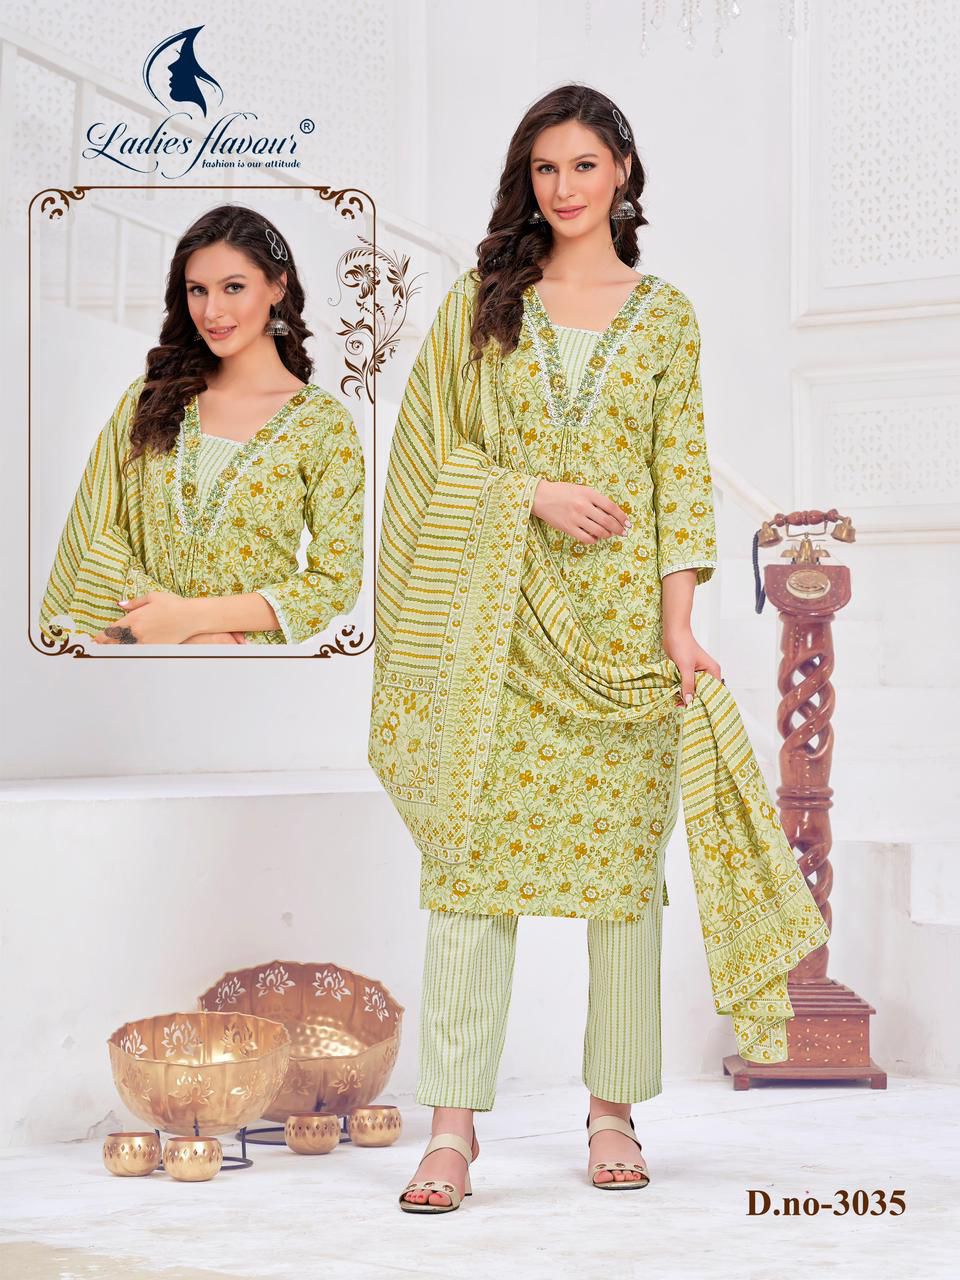 3034-3035 Ladies Flavour Cotton Readymade Pant Style Suits